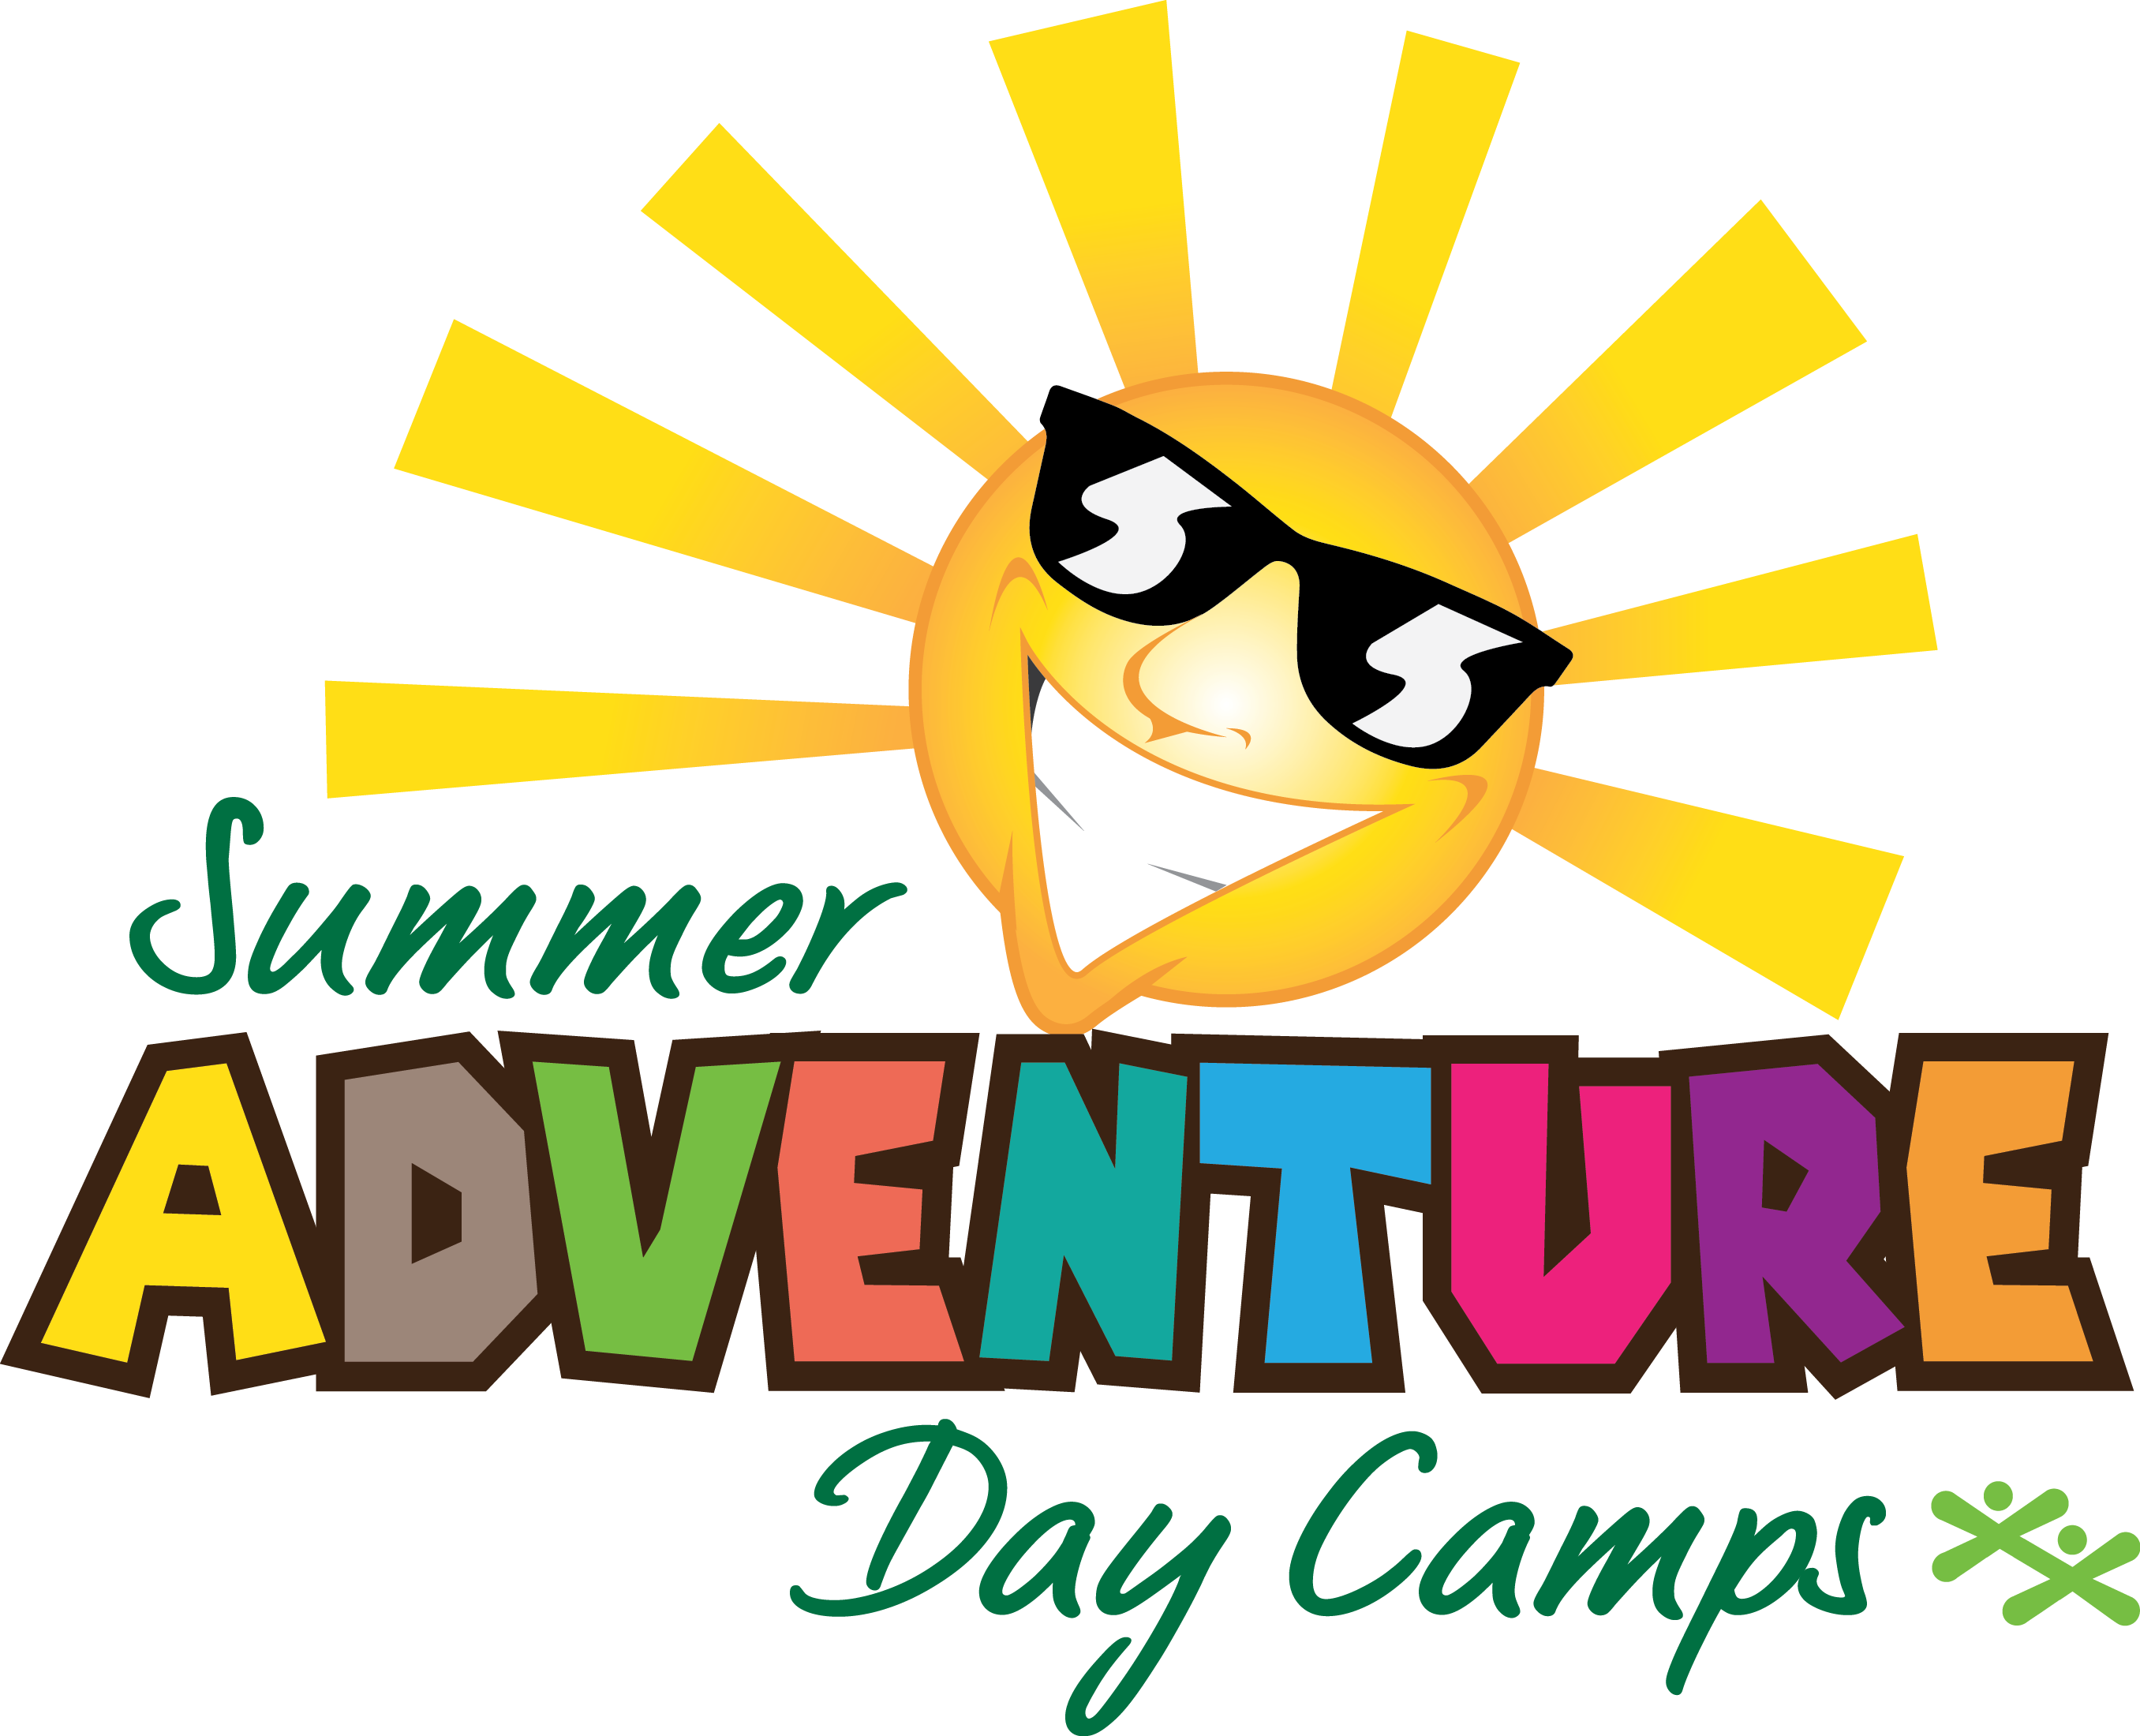 Our Summer Adventure Day Camps Are A Registration Based, - Our Summer Adventure Day Camps Are A Registration Based, (2712x2200)